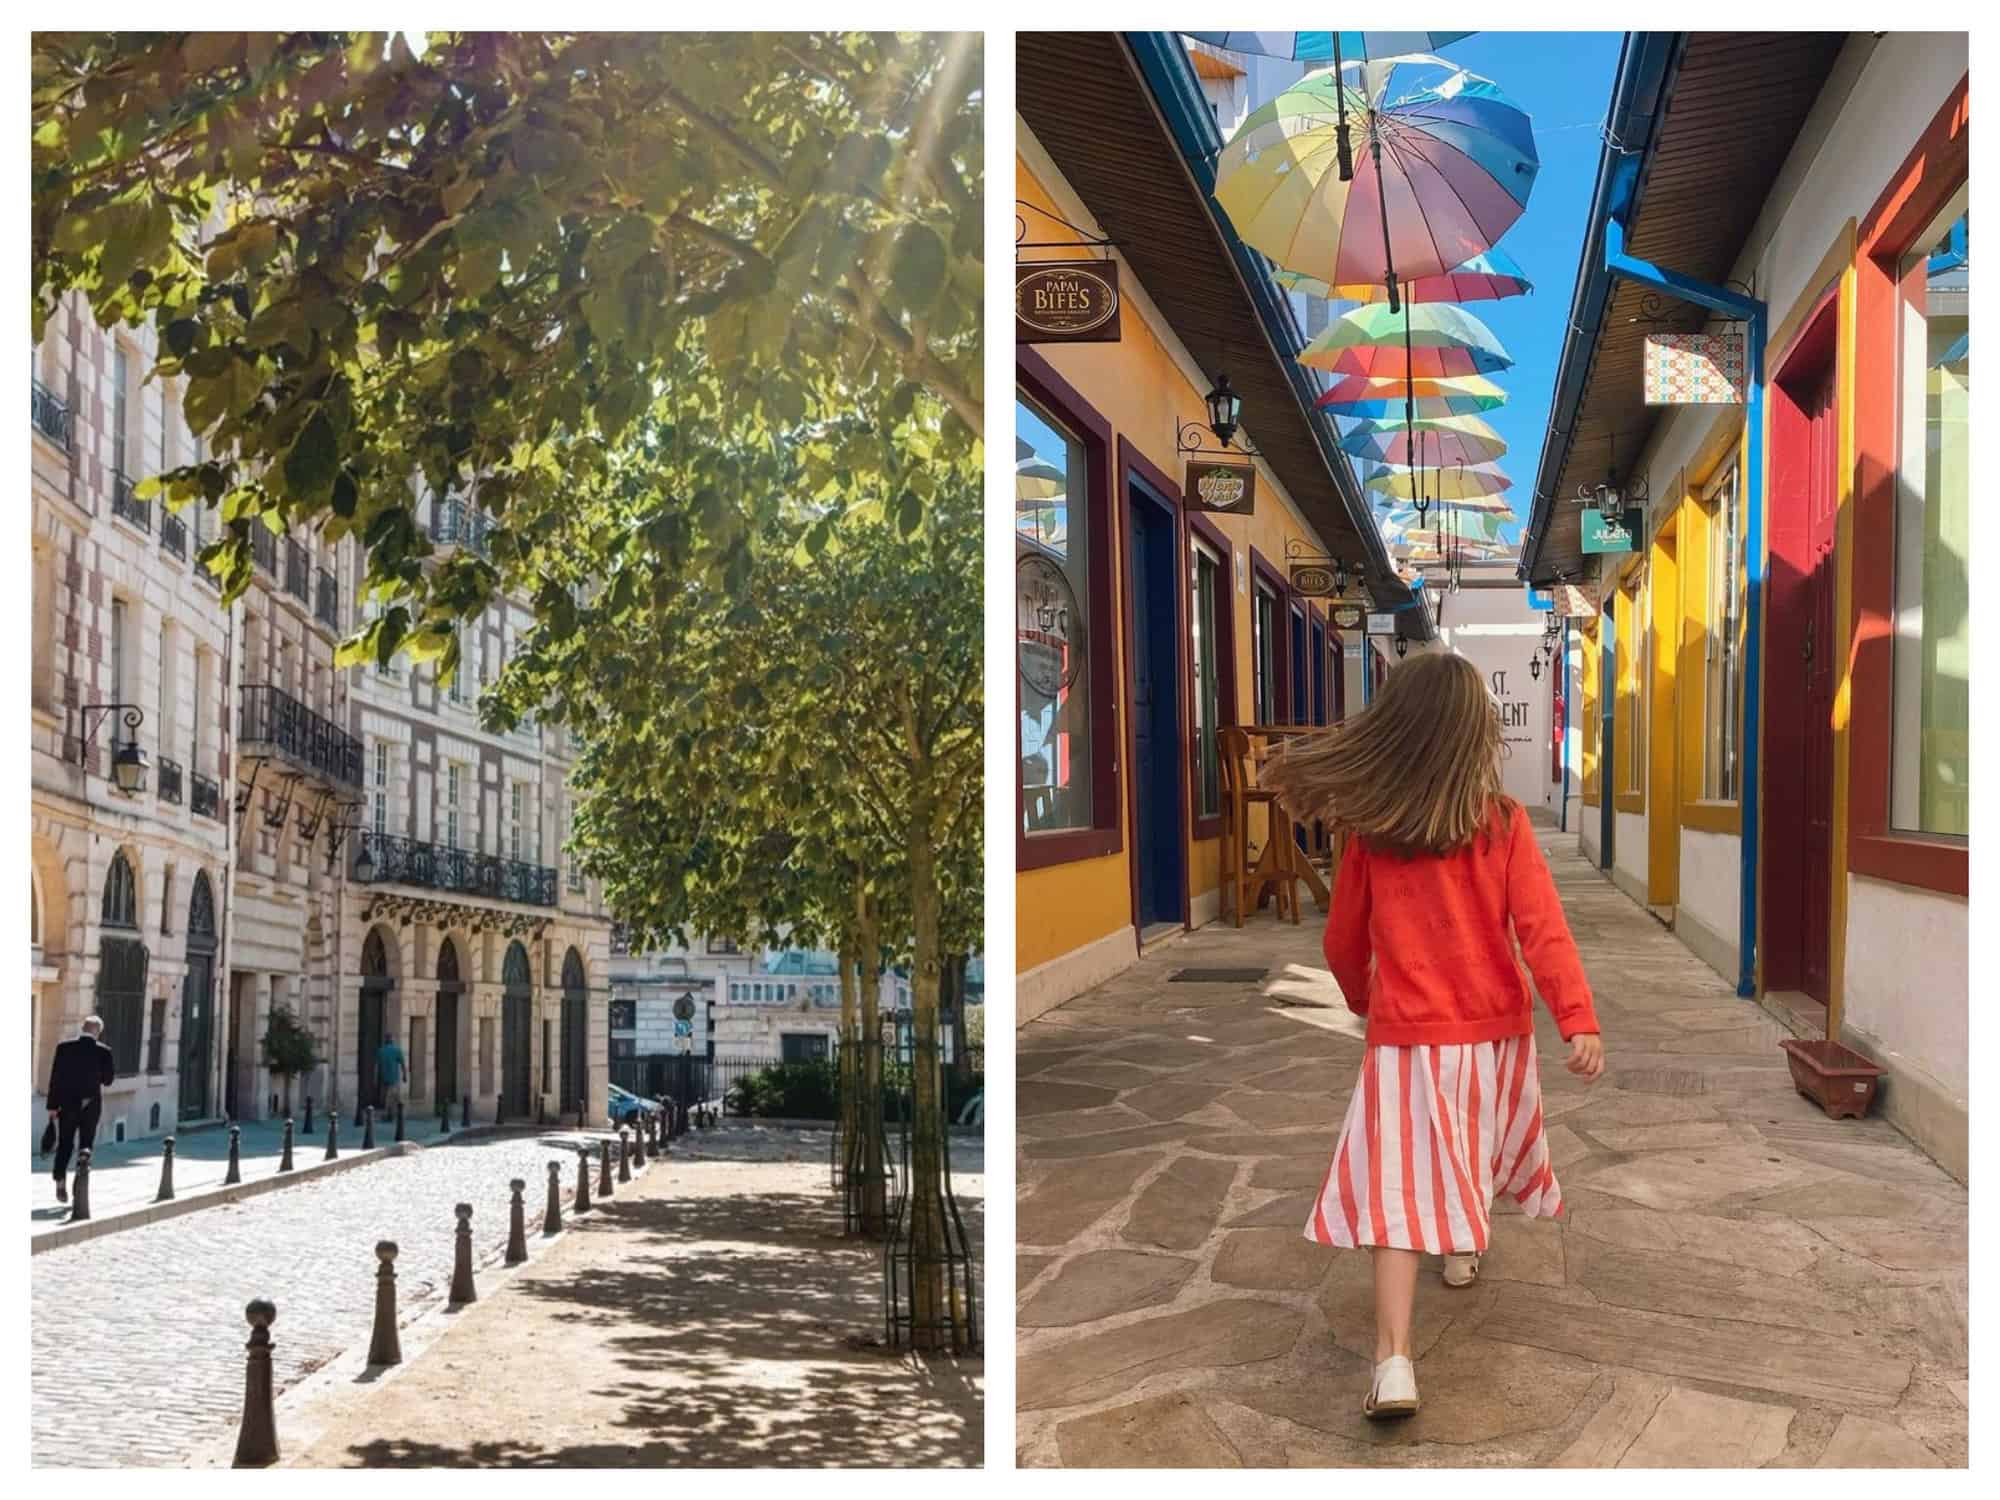 Left: A cobbled street in Paris lined with beige buildings and green trees. Right: A girl in red walks in a street decorated with rainbow umbrellas.